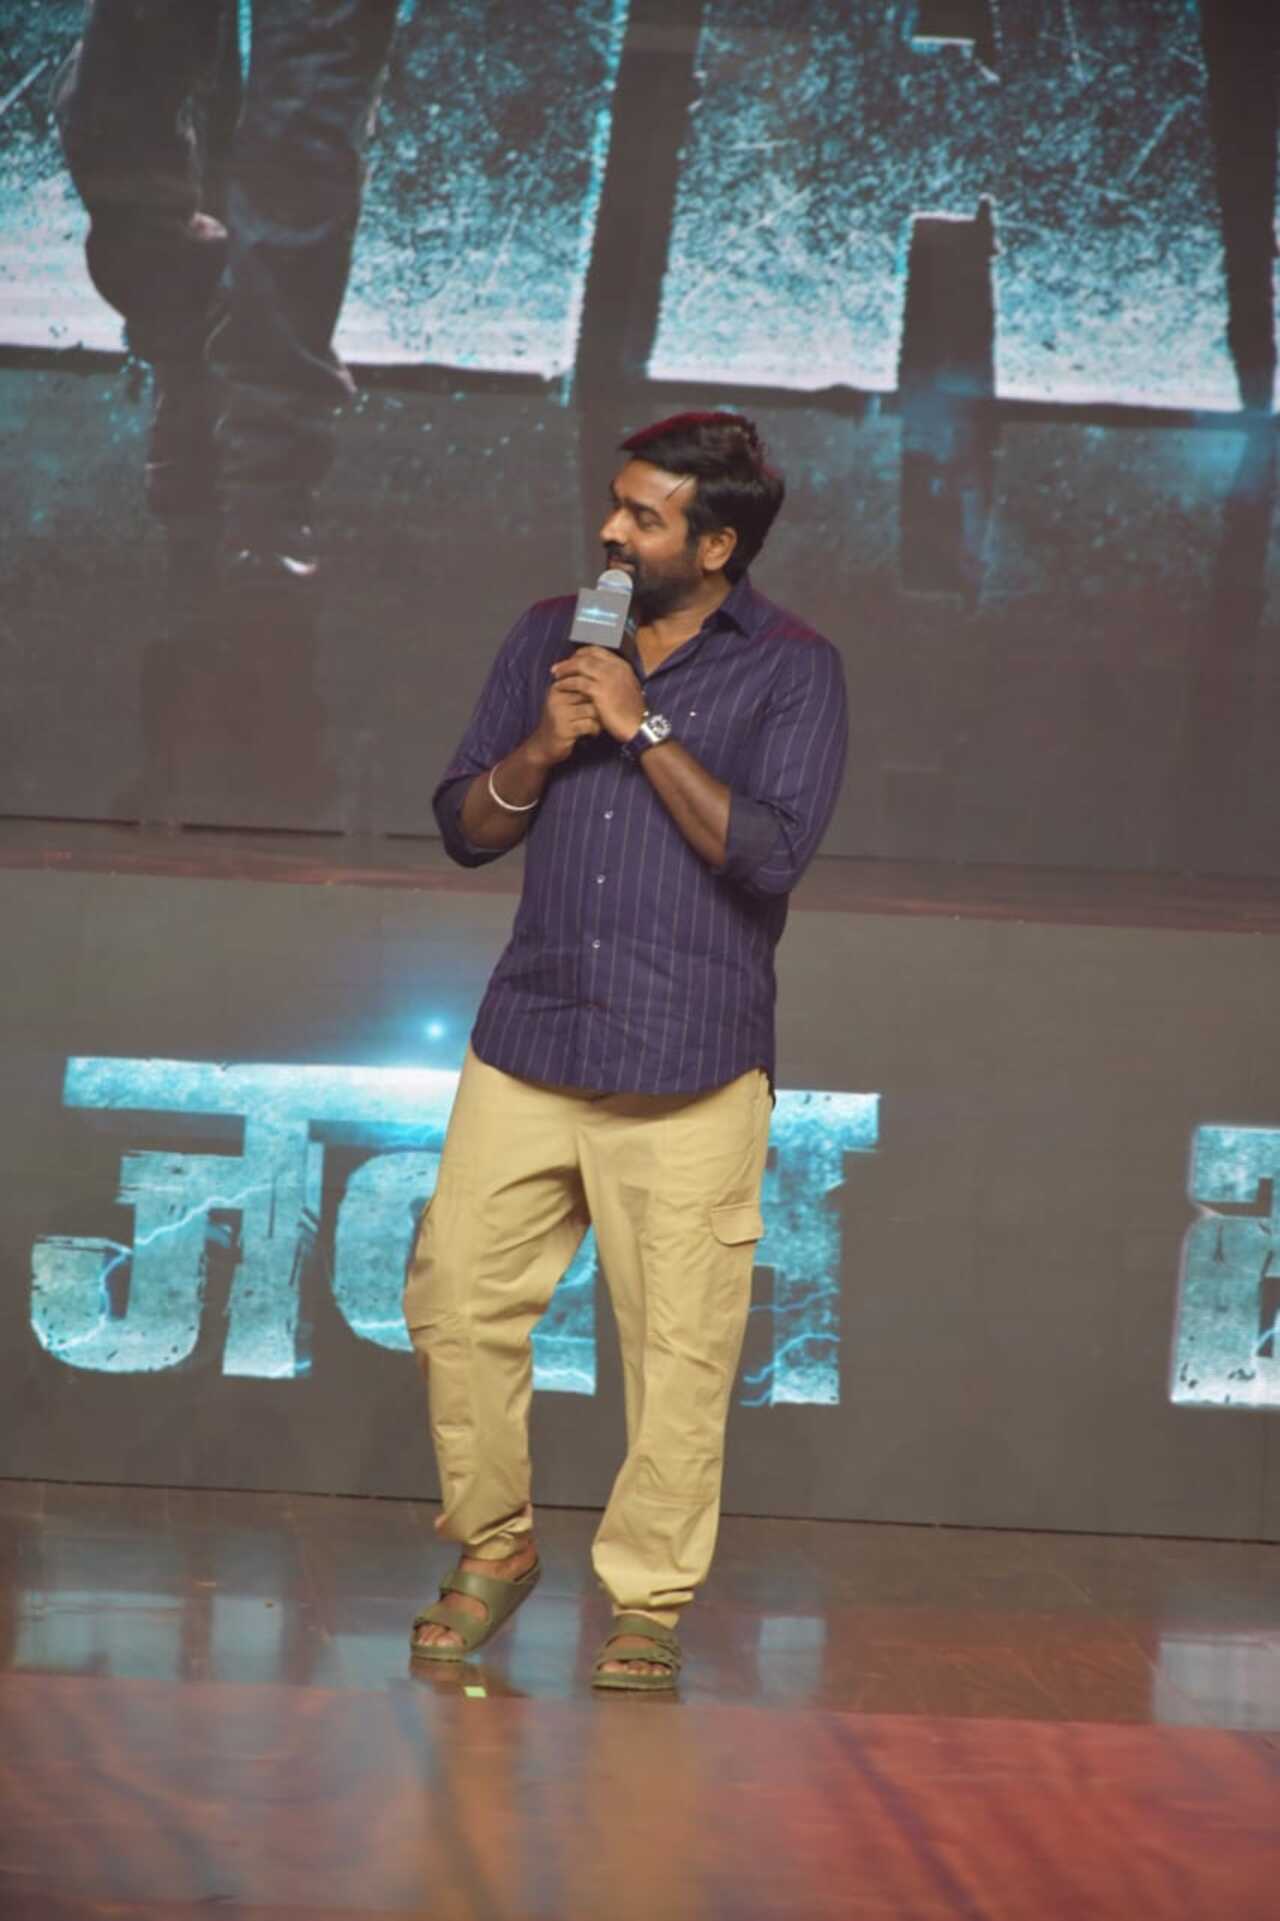 Superstar Vijay Sethupathi attended the event wearing a simple yet smart outfit